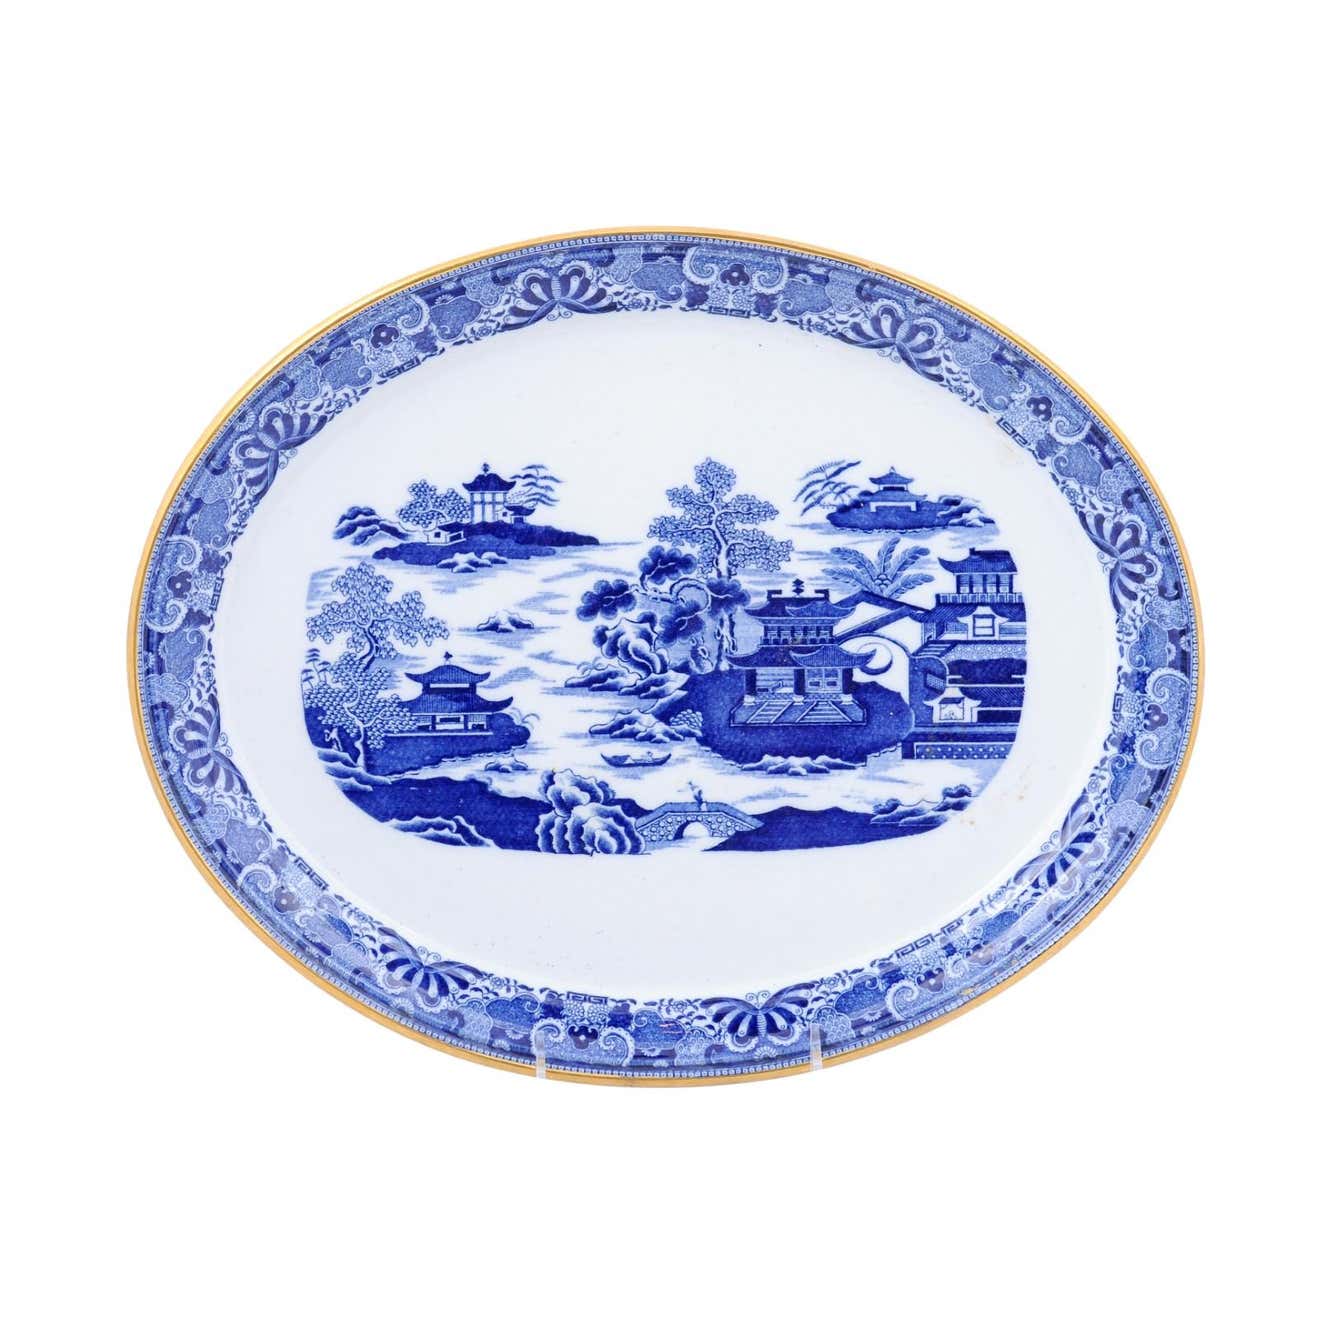 English 19th Century Oval Blue and White Porcelain Platter with Chinoiseries